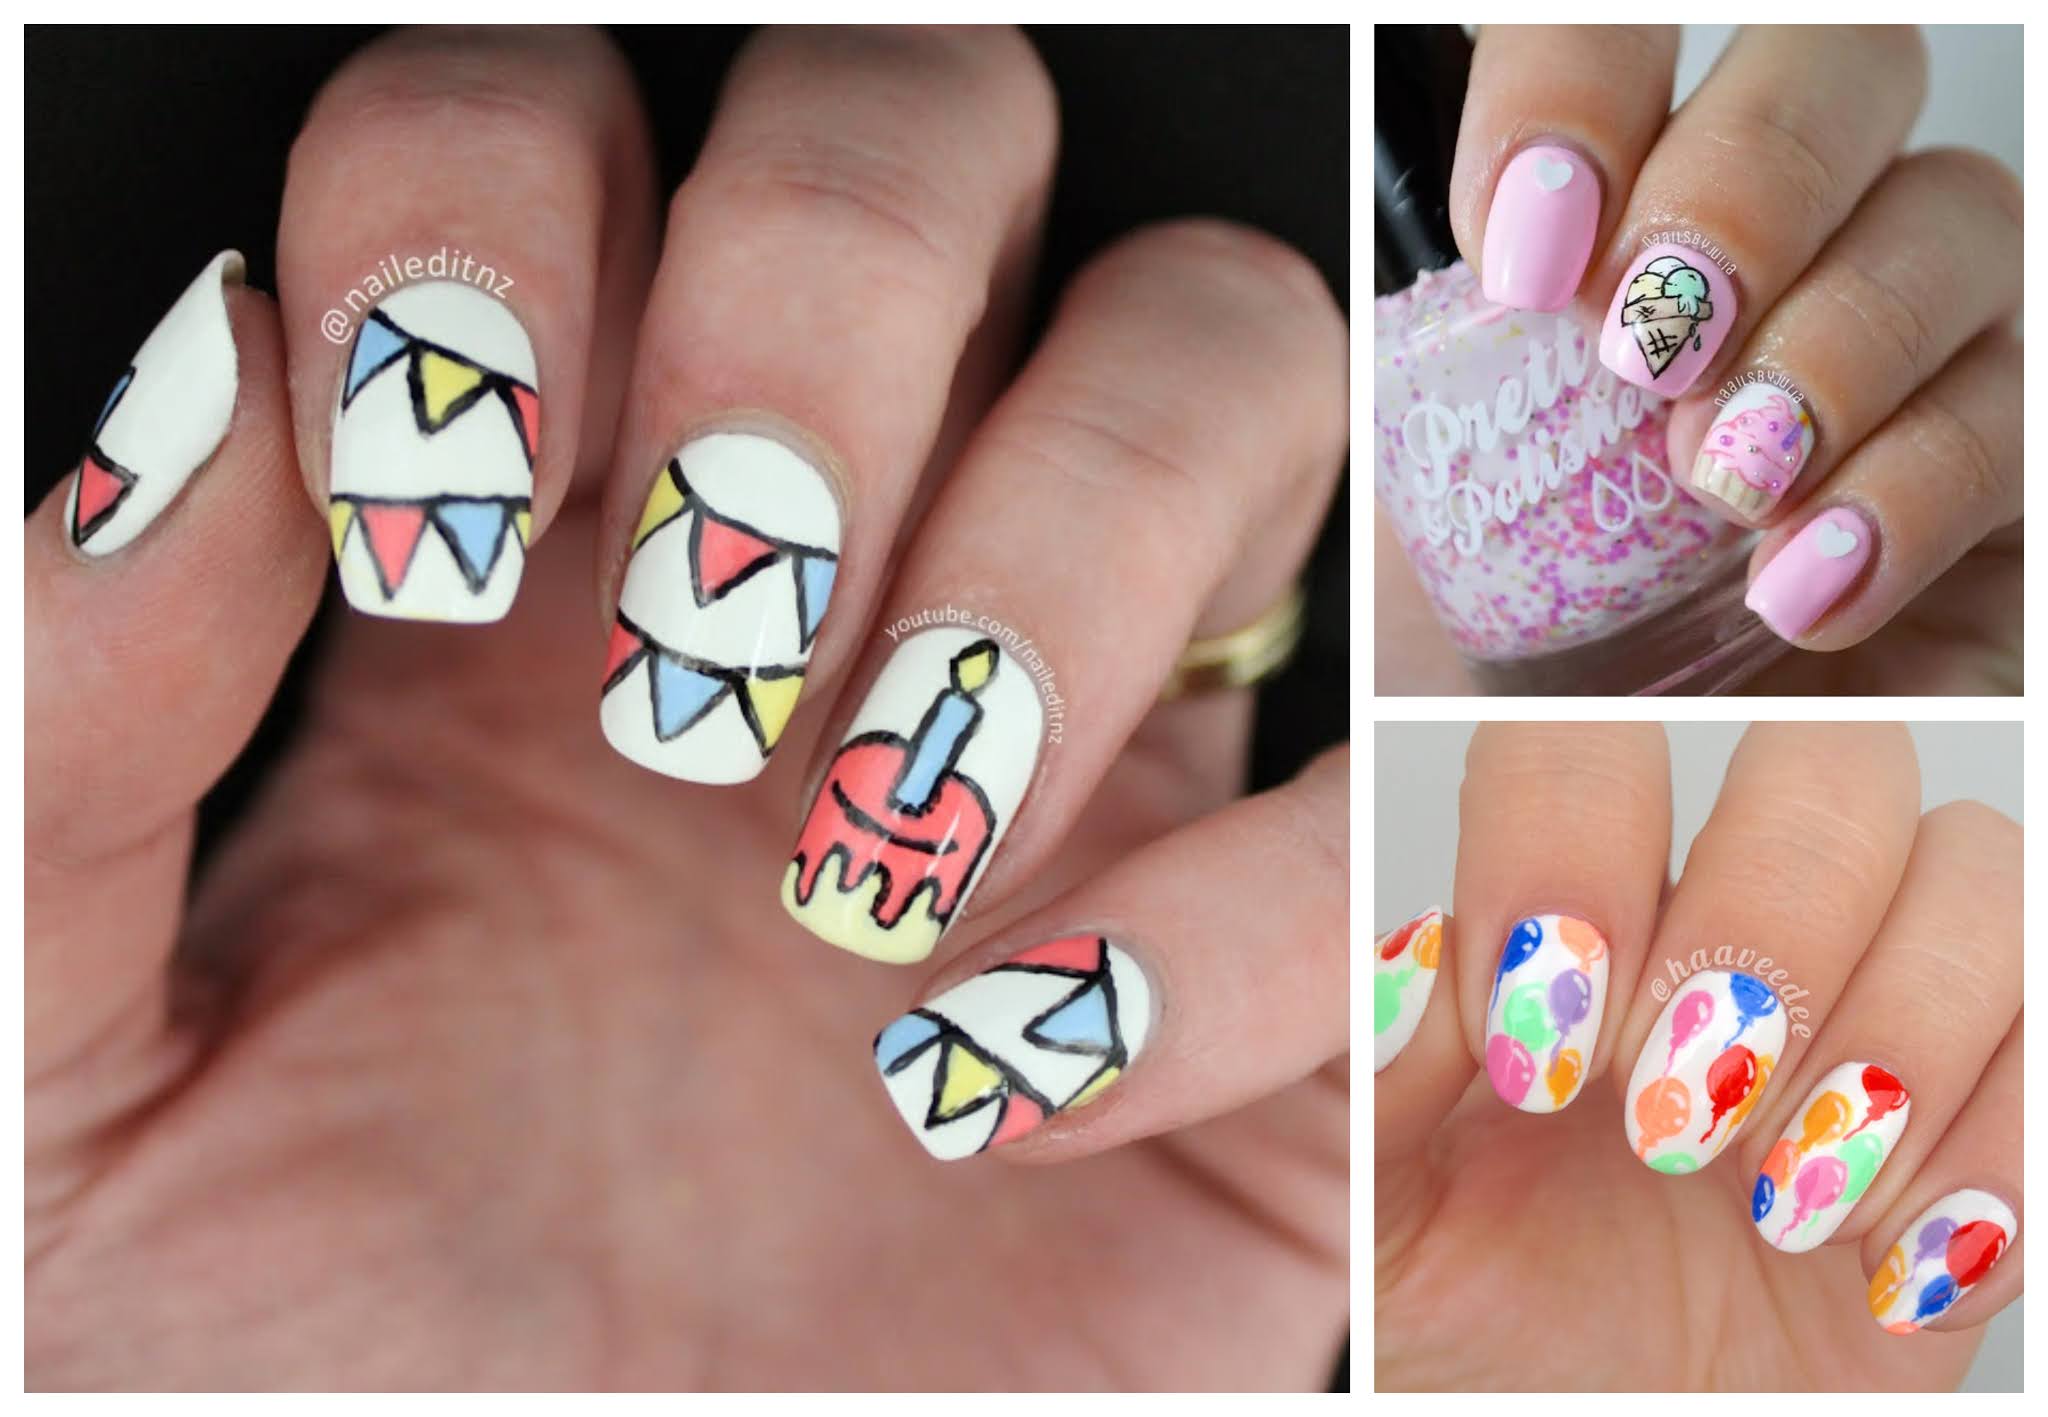 2. Cute Birthday Nail Designs for Girls - wide 7